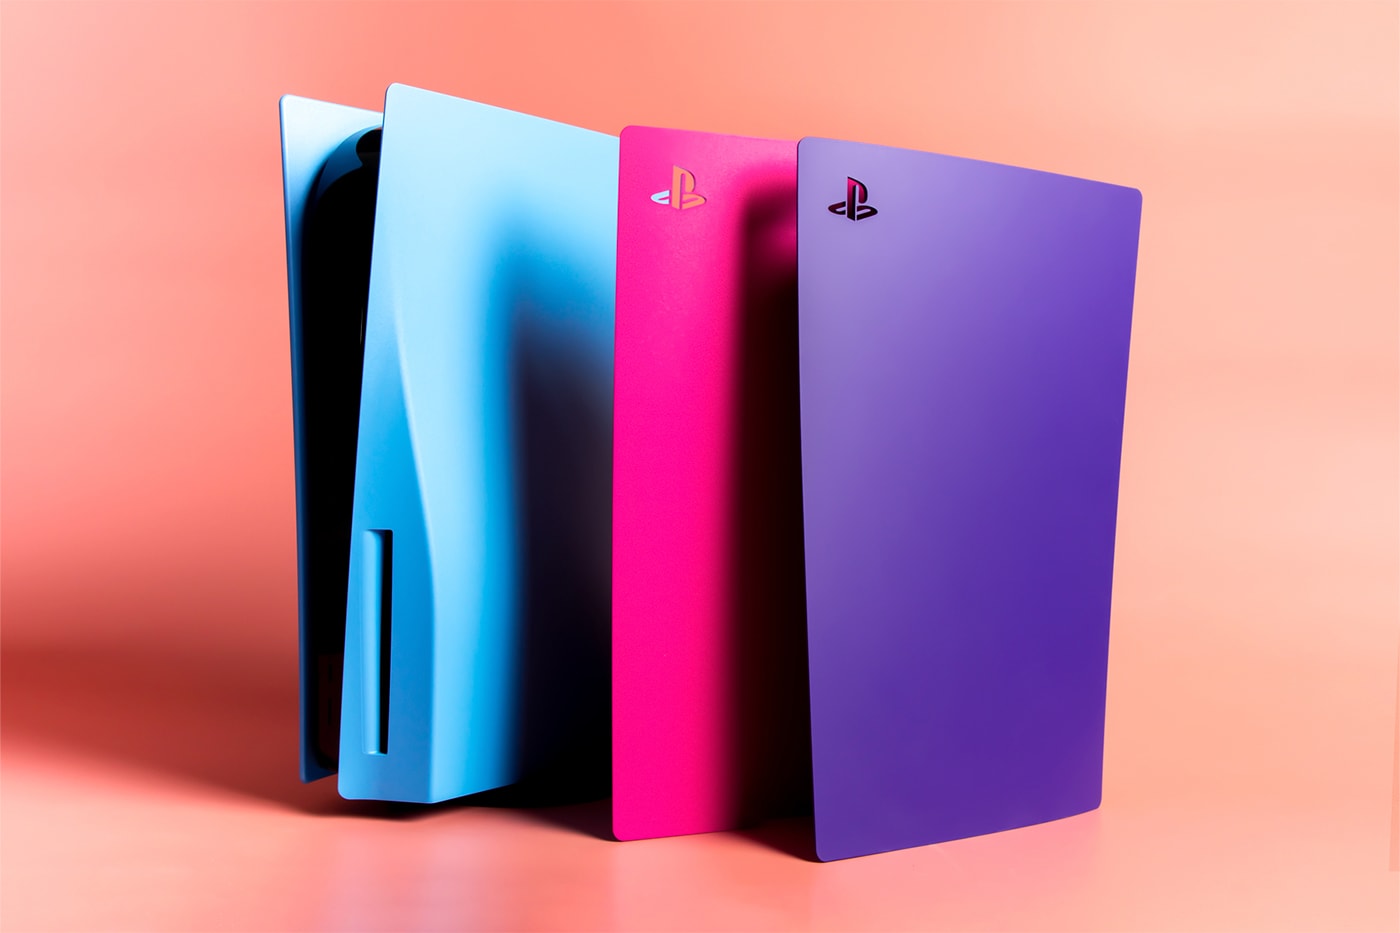 PlayStation 5 PS5 Disc Galactic Purple - Official Sony Console Cover